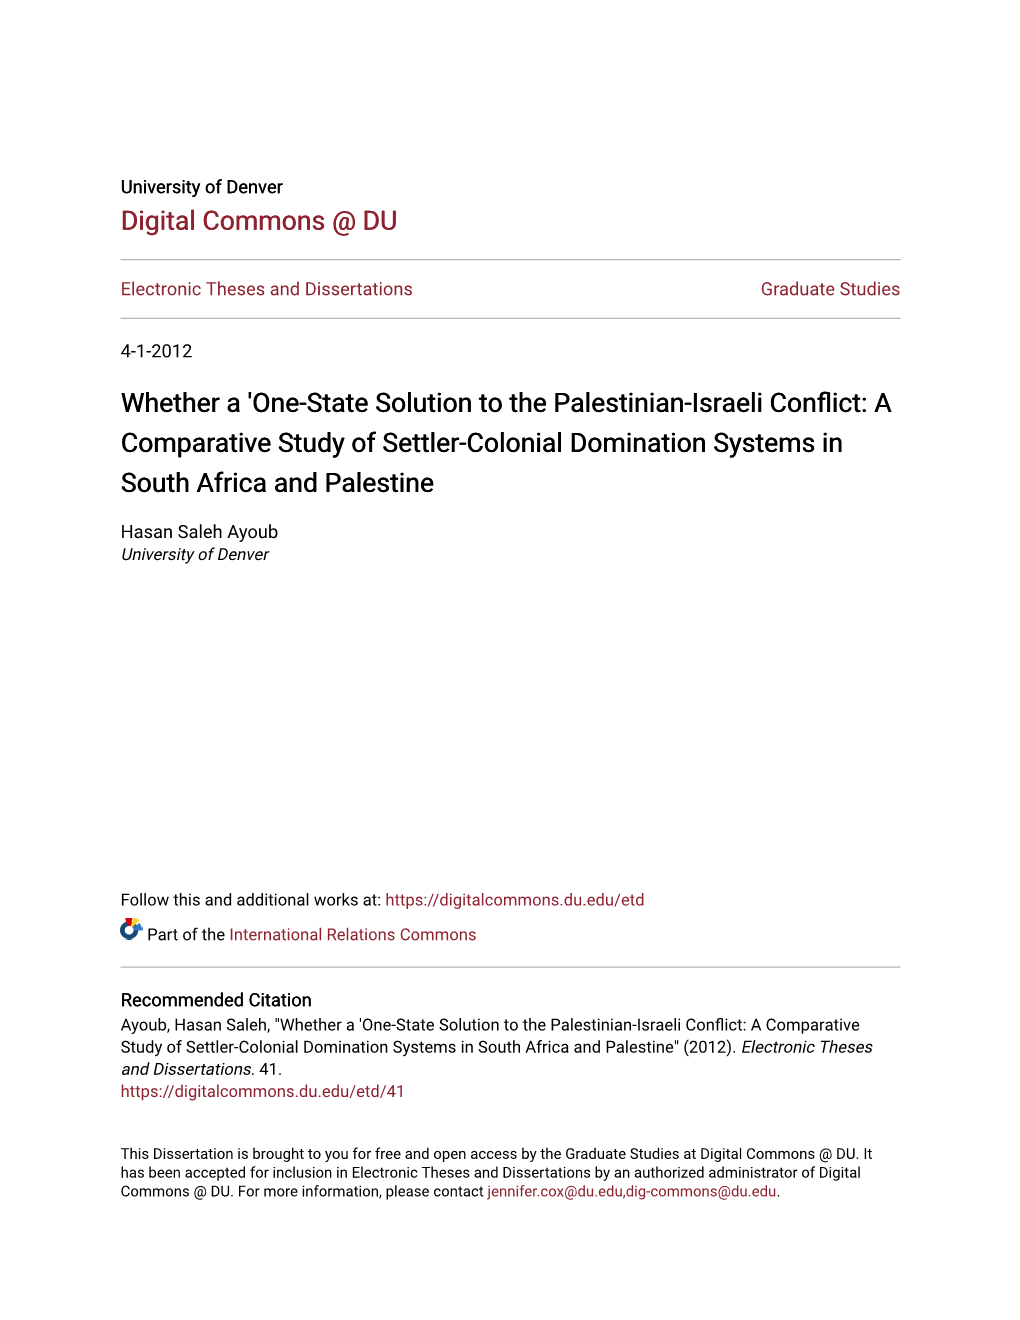 One-State Solution to the Palestinian-Israeli Conflict: a Comparative Study of Settler-Colonial Domination Systems in South Africa and Palestine